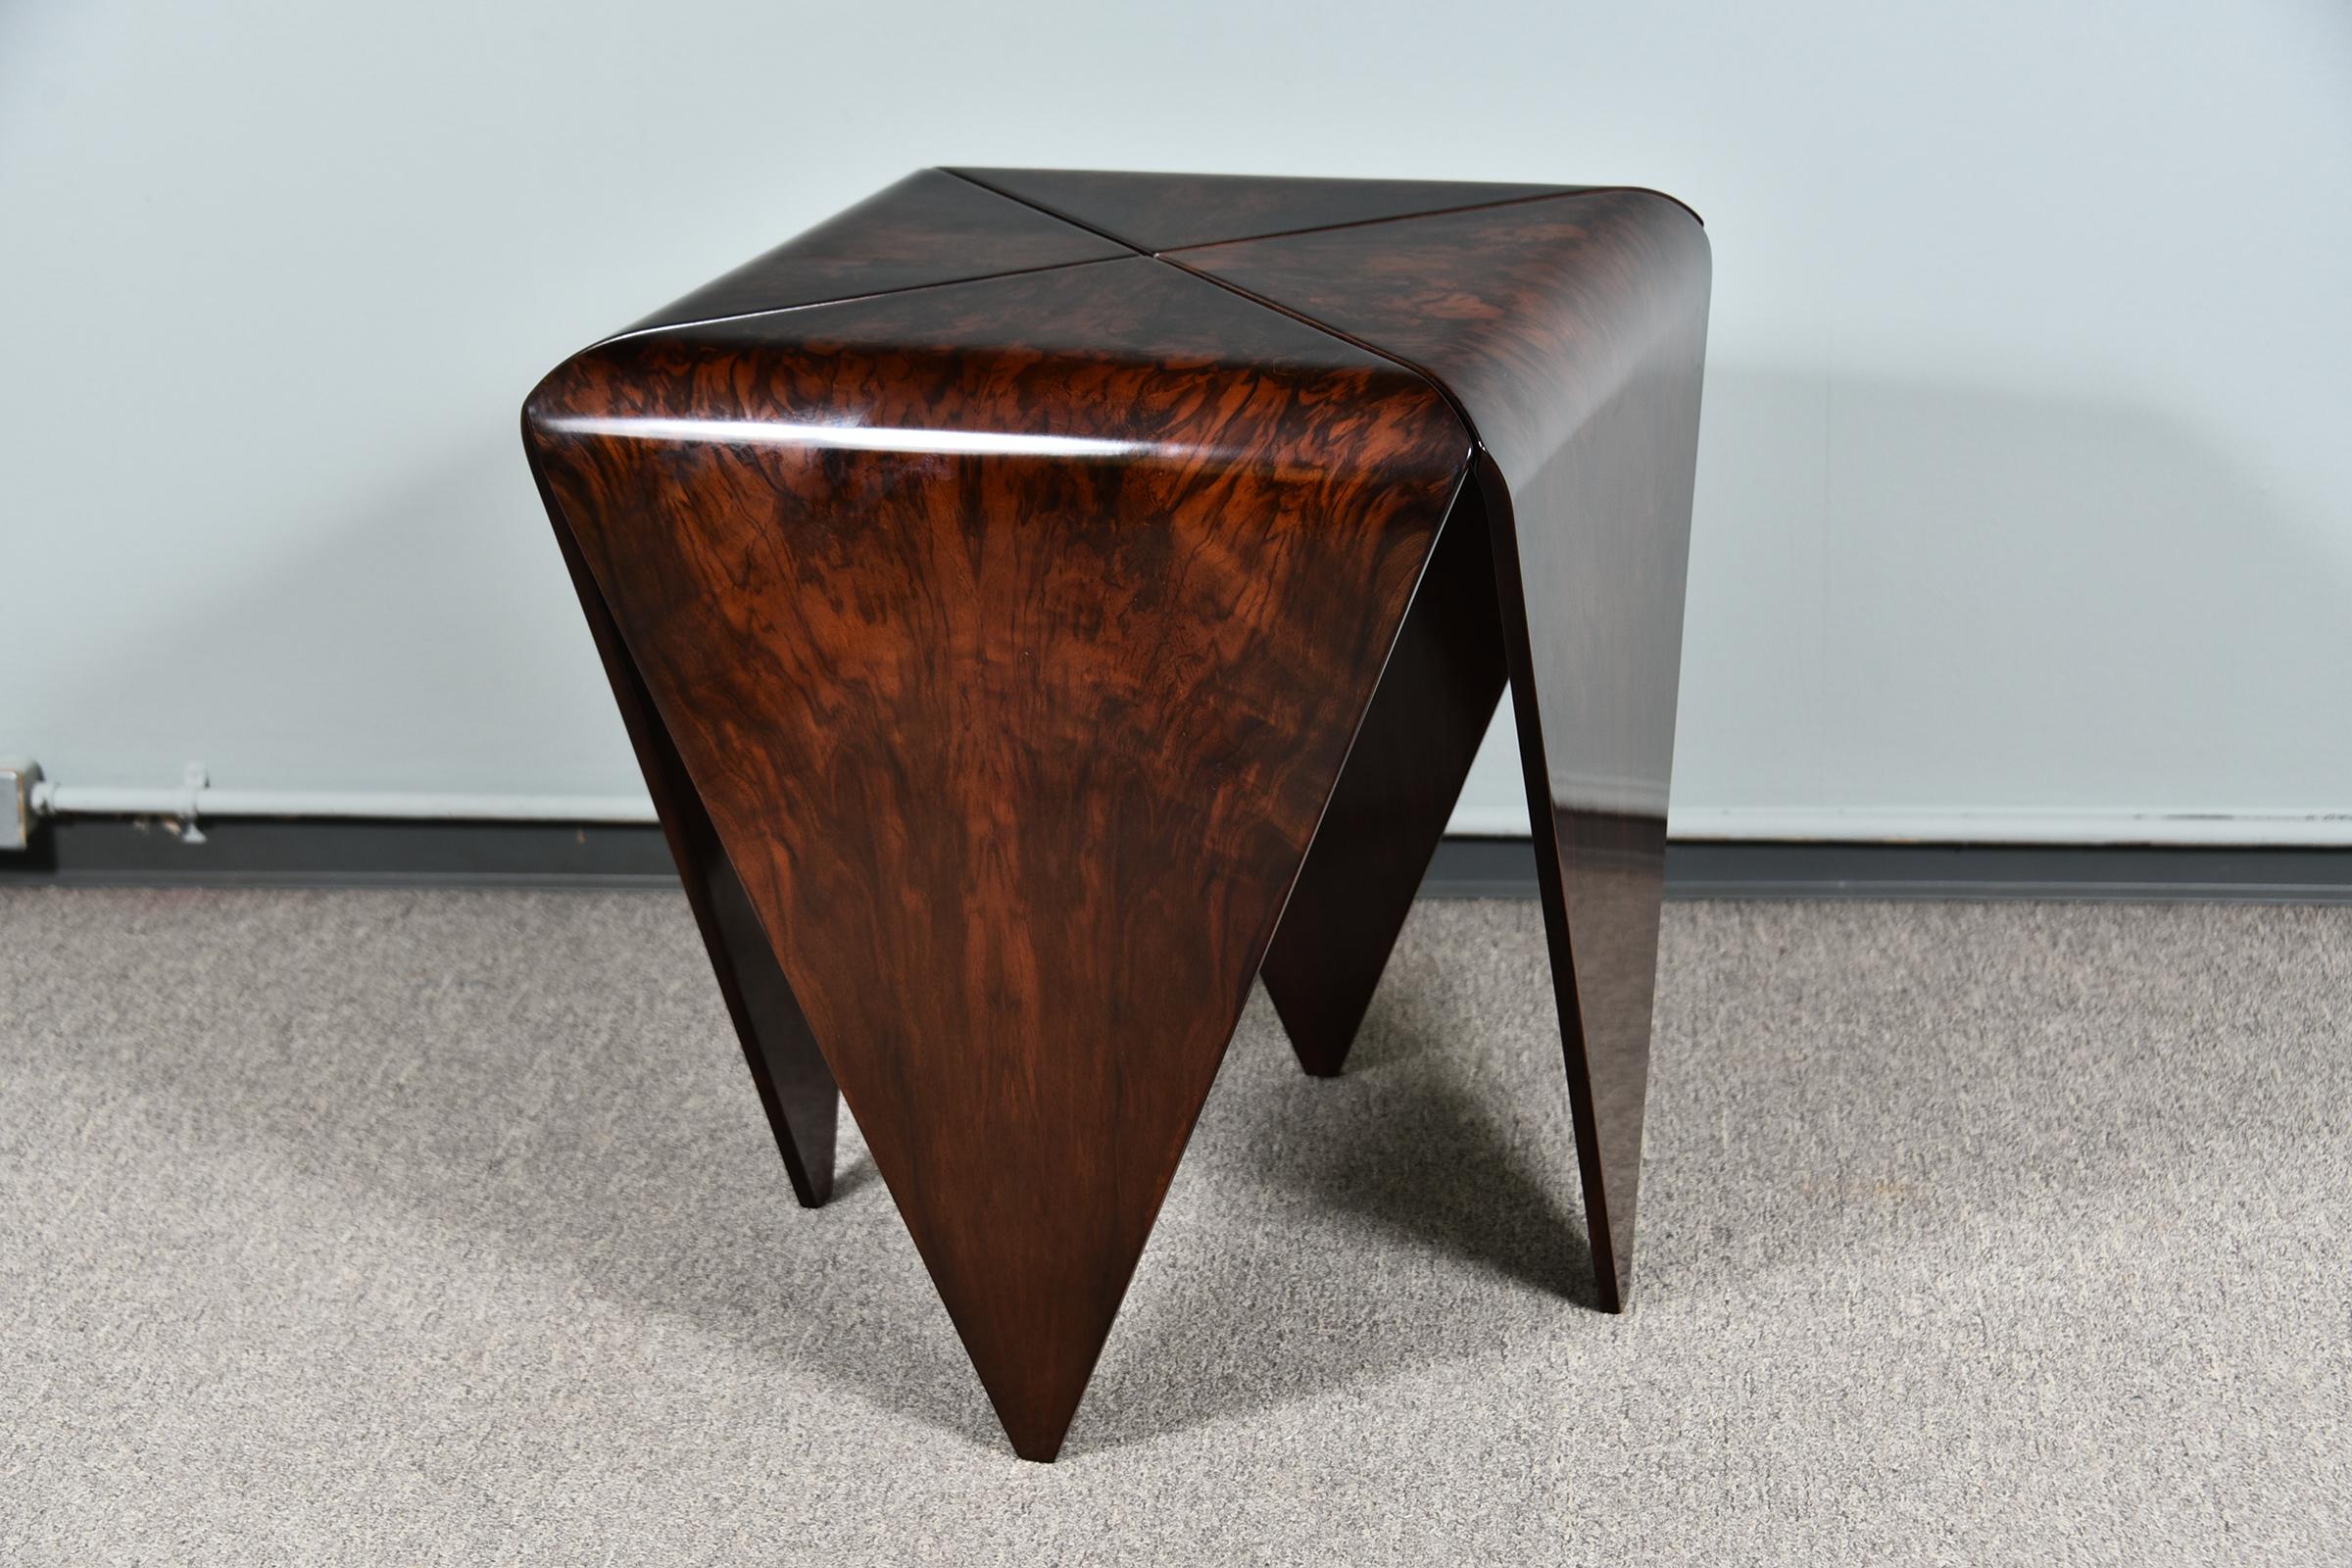 Midcentury Brazilian side table in walnut
Attributed to Jeorge Zalszupin Atelier
Very unique side tables are composed out of 4 pieces of wood. Tabletop has square form and legs are continuation of the tabletop.
Highly polished walnut wood